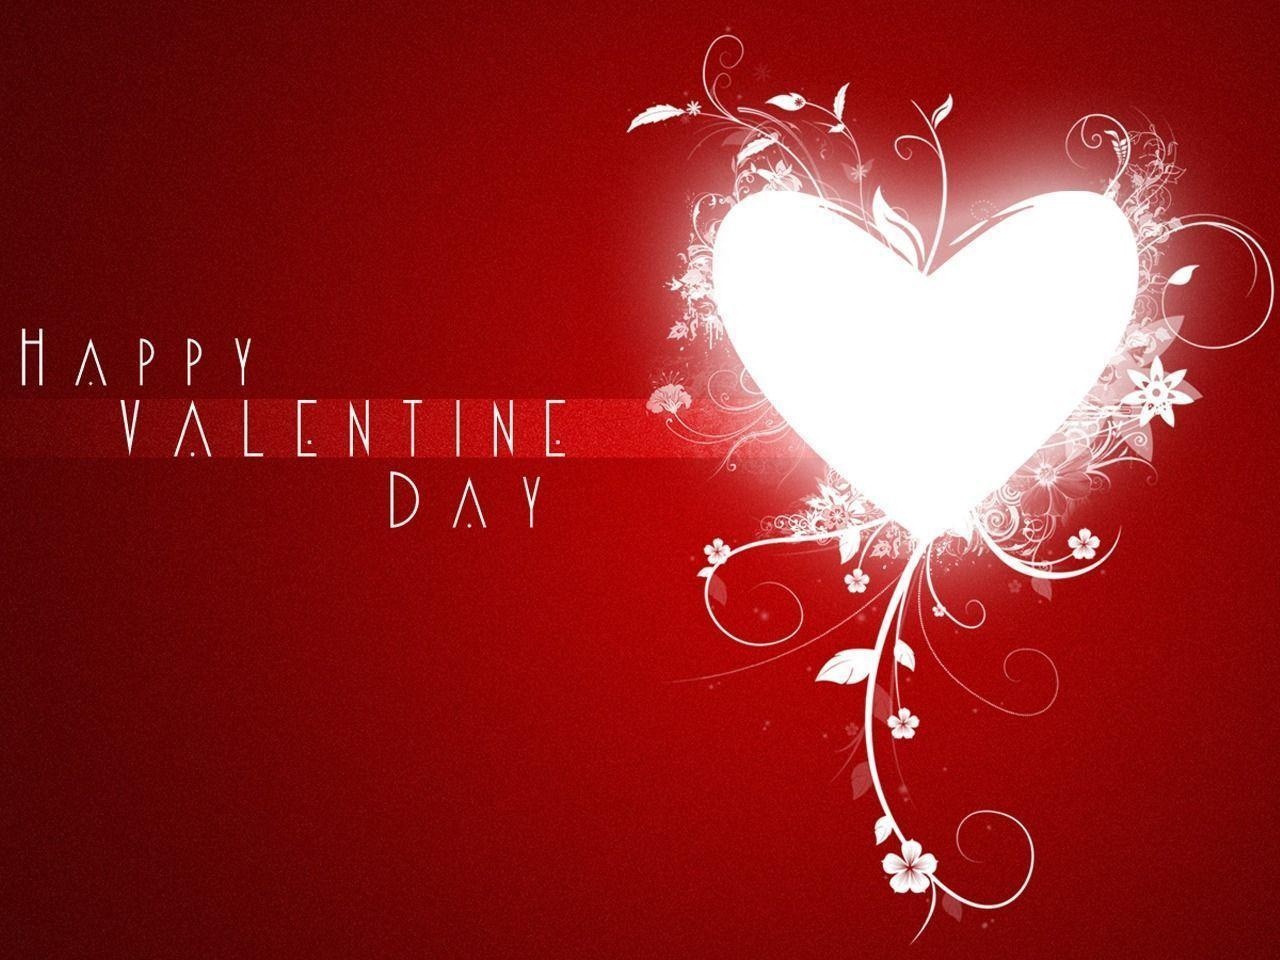 Download Wallpapers of Valentine Day 2018 | HD Images and Photos